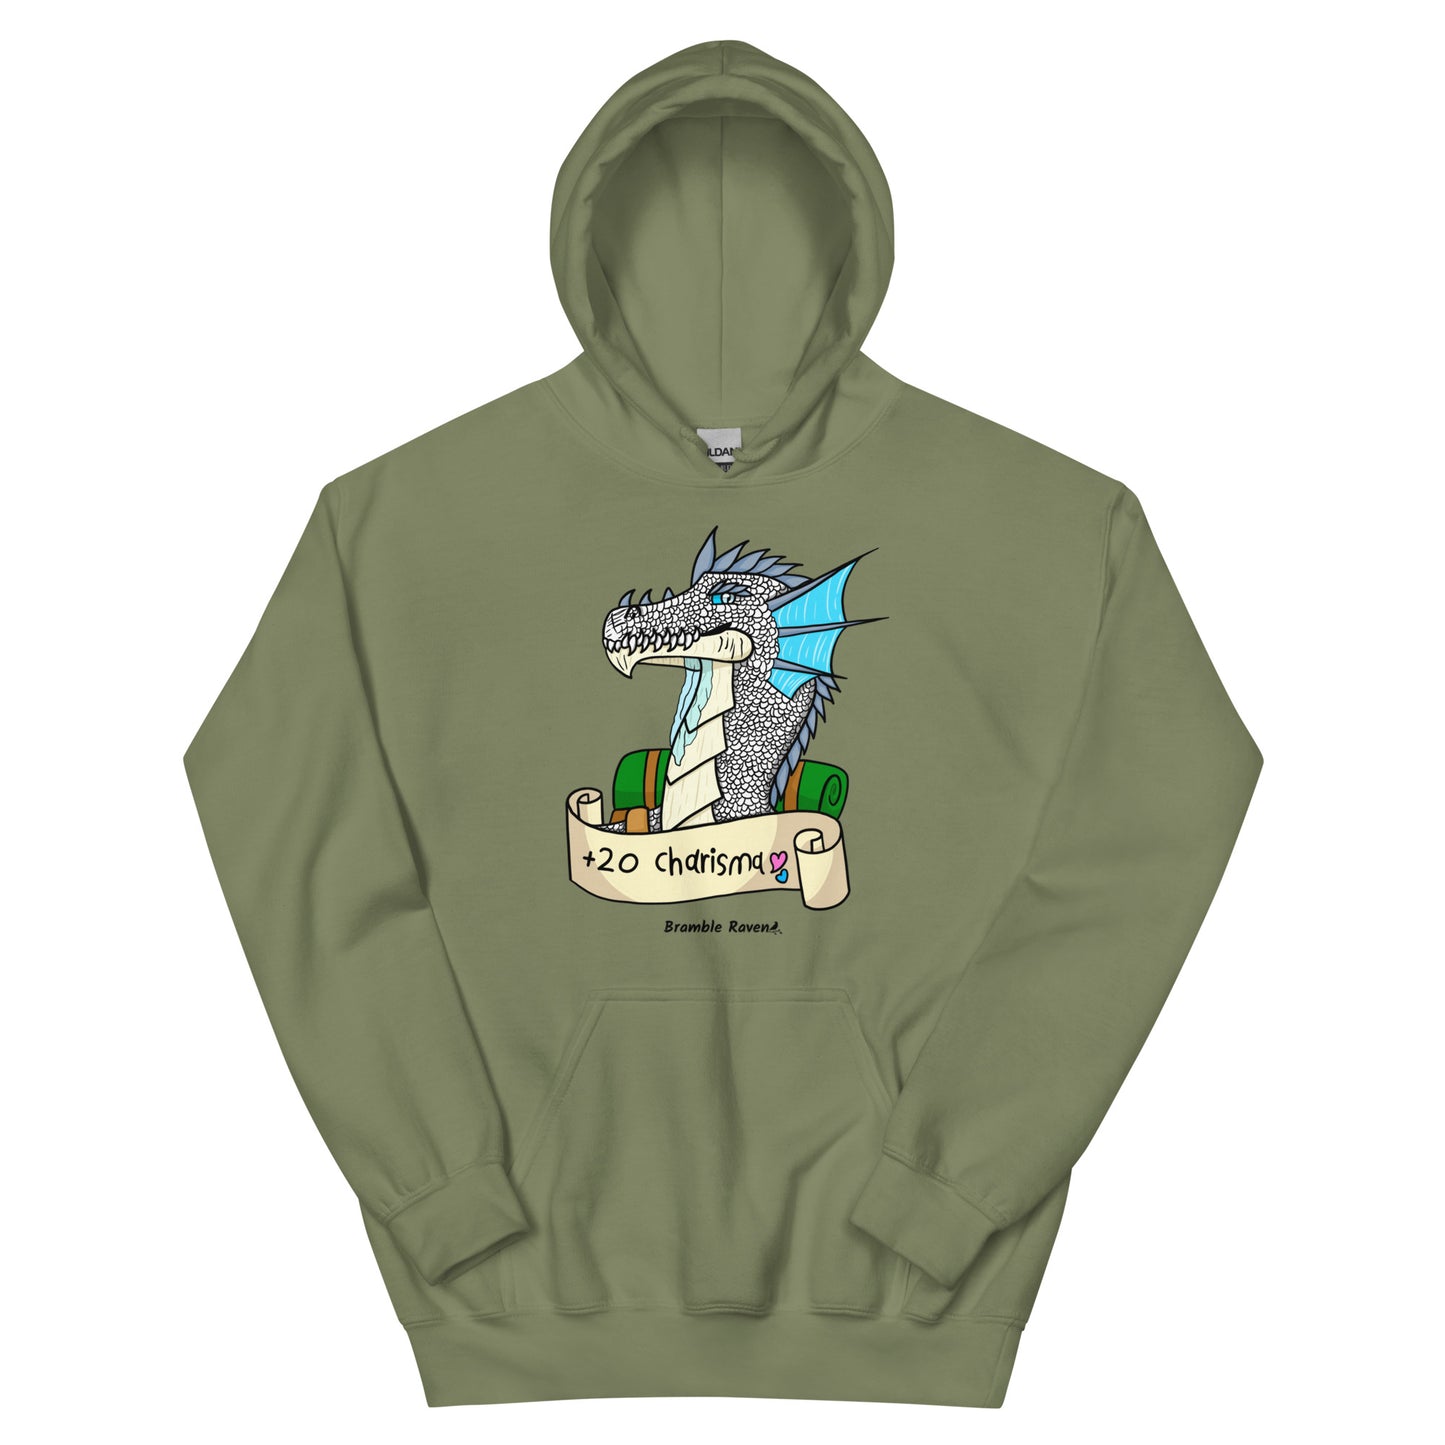 Original Bicycle the Bard dragon +20 Charisma design on unisex military green colored hoodie.